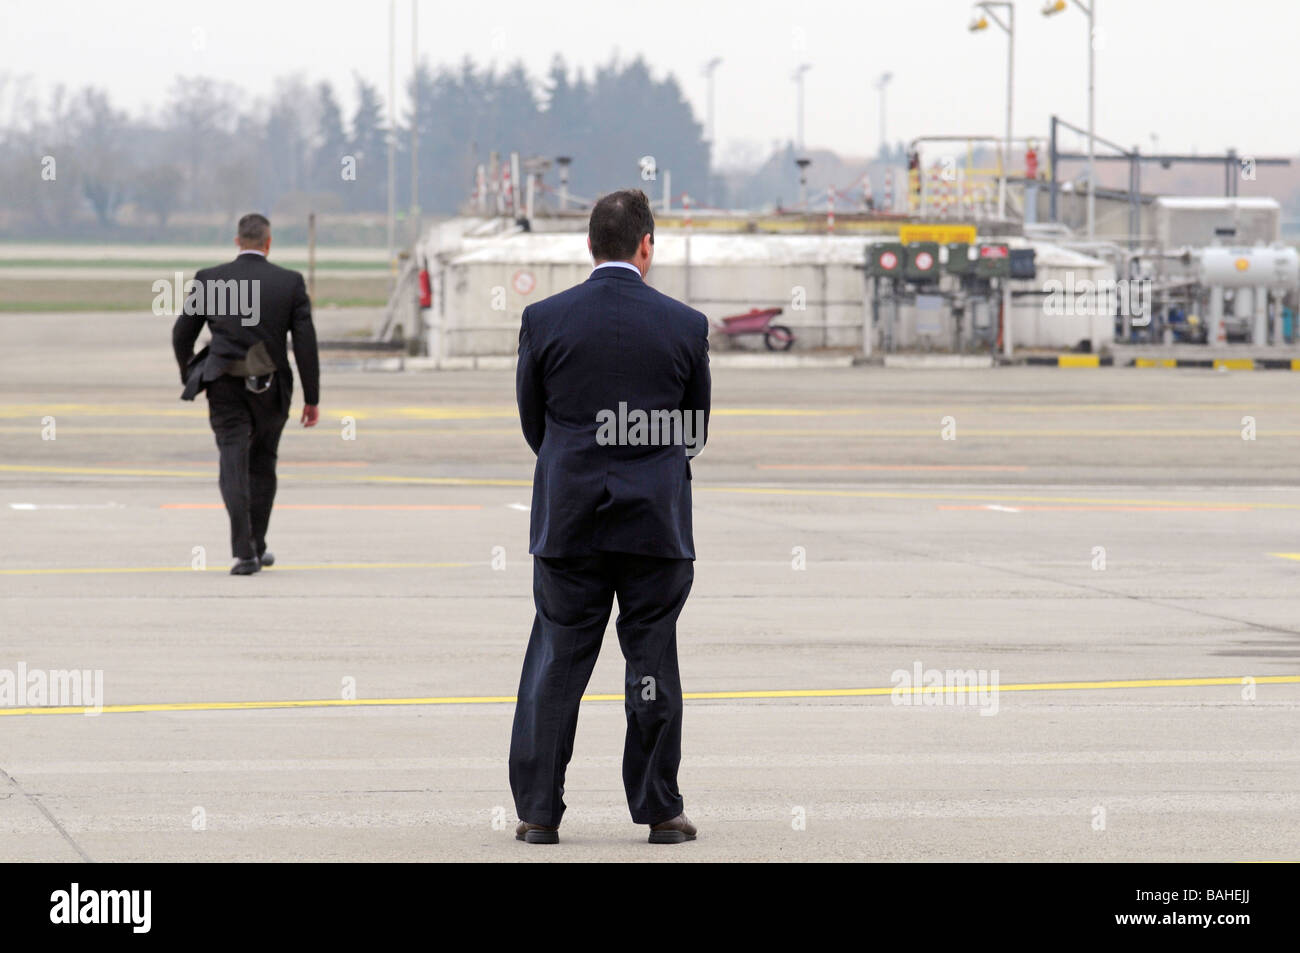 US secret service agents taking position on an airport in France ahead of the US president's 'Air Force One' plane landing. Stock Photo